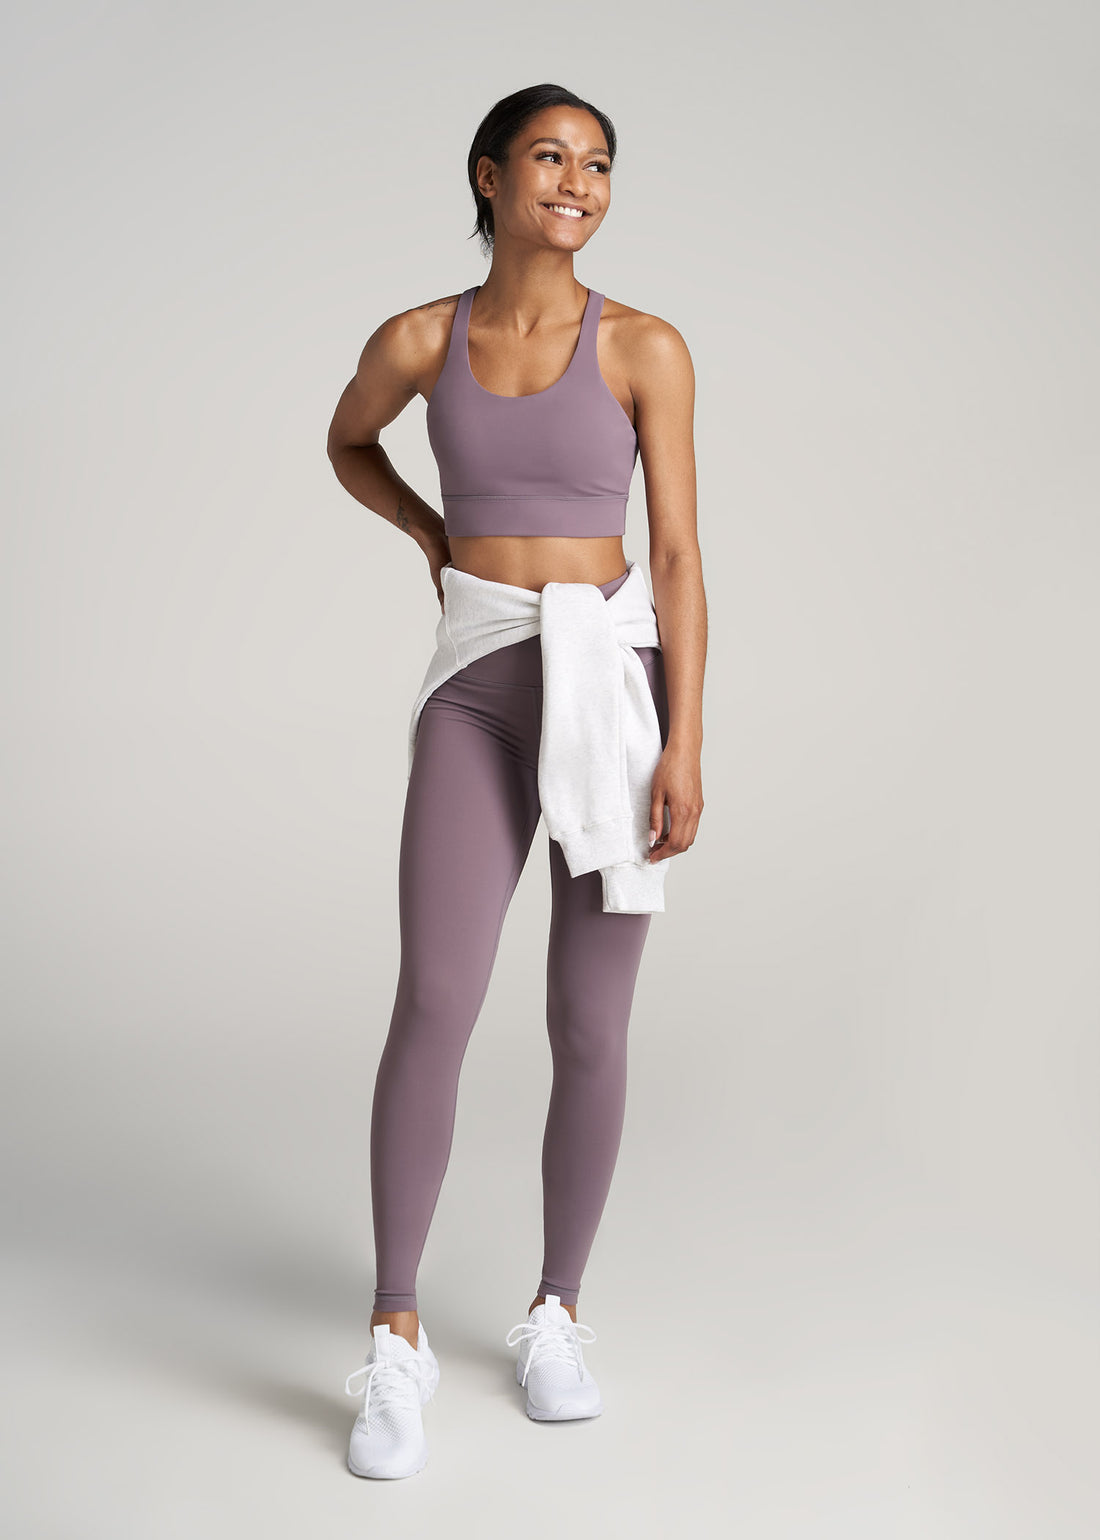 A tall woman wearing American Tall's Balance Crisscross Sport Bra in Smoked Mauve, with matching leggings and a white sweater tied at her waist.